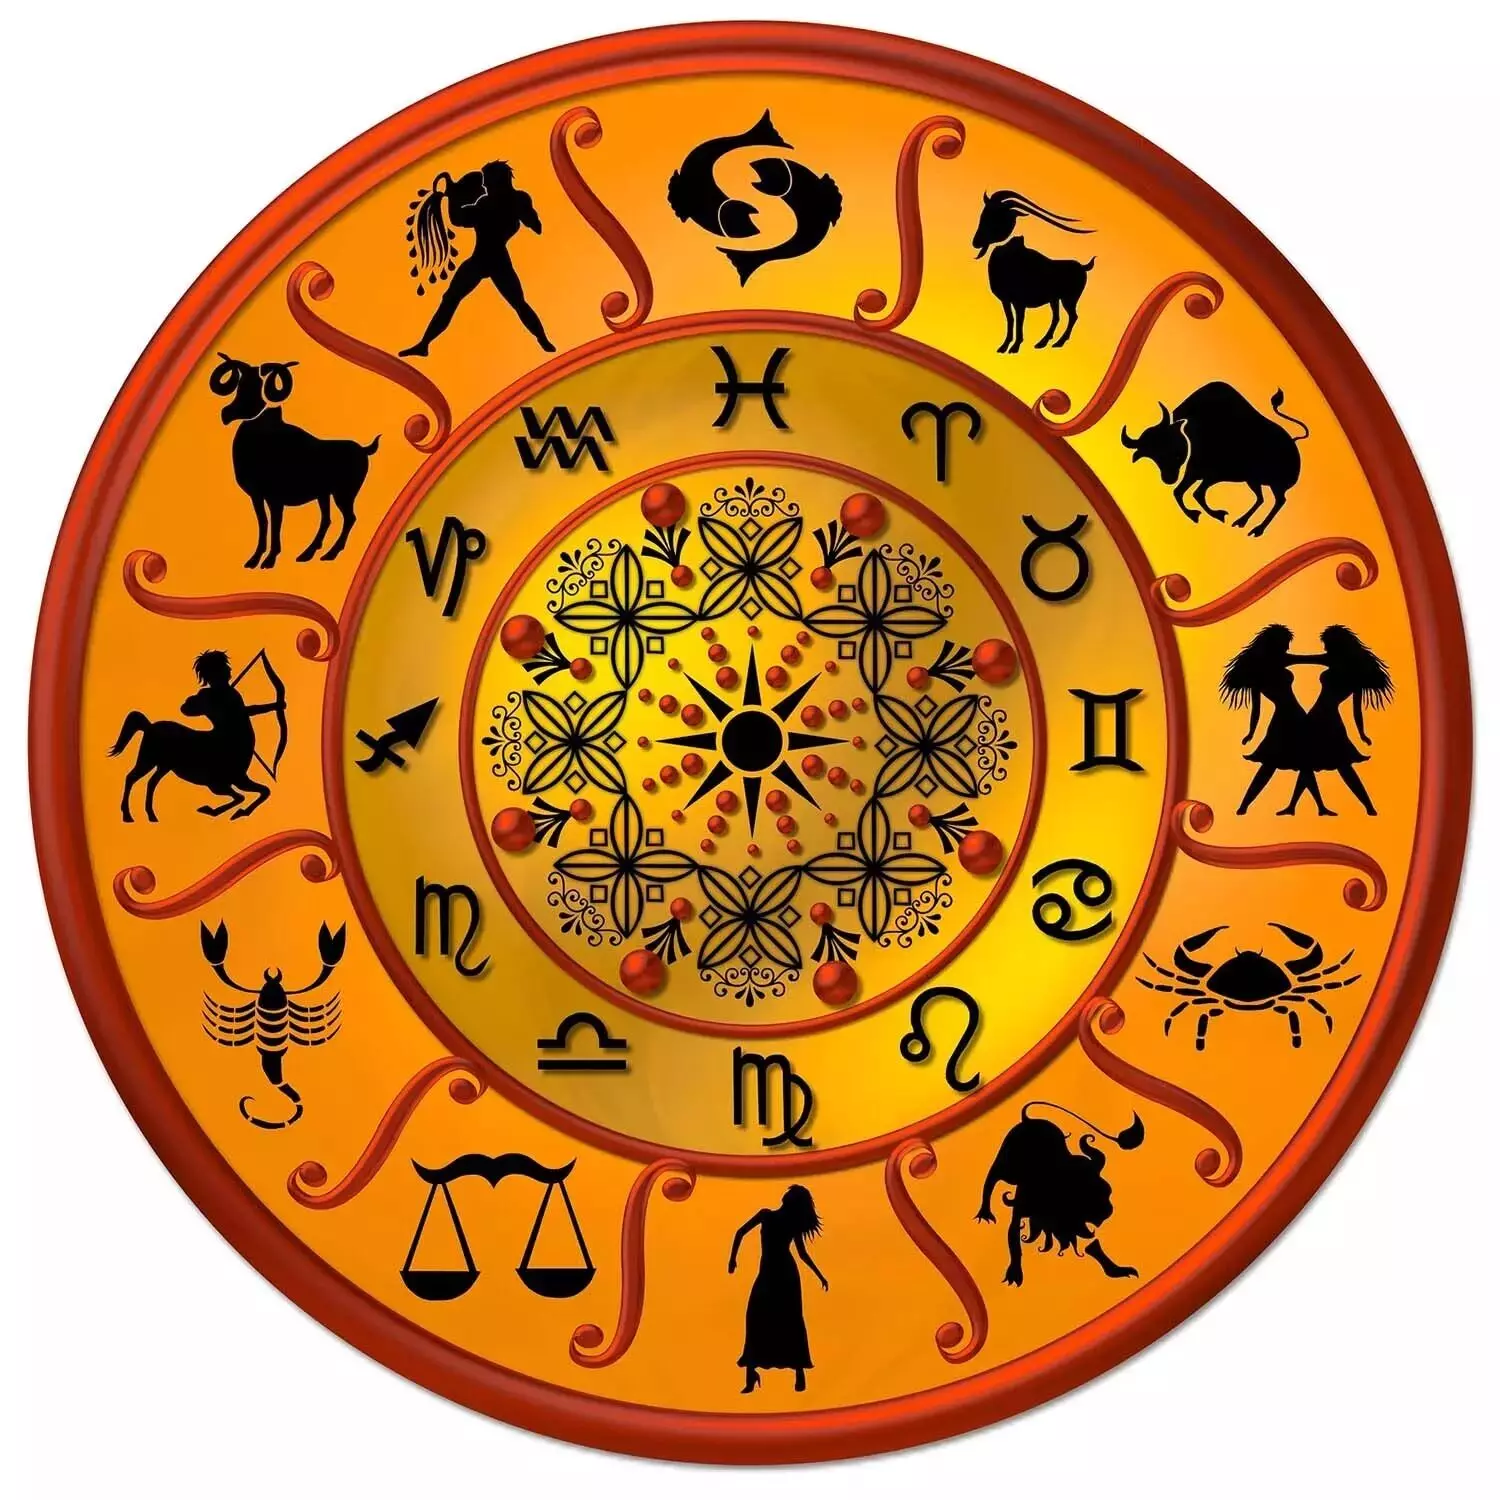 01 July  – Know your todays horoscope